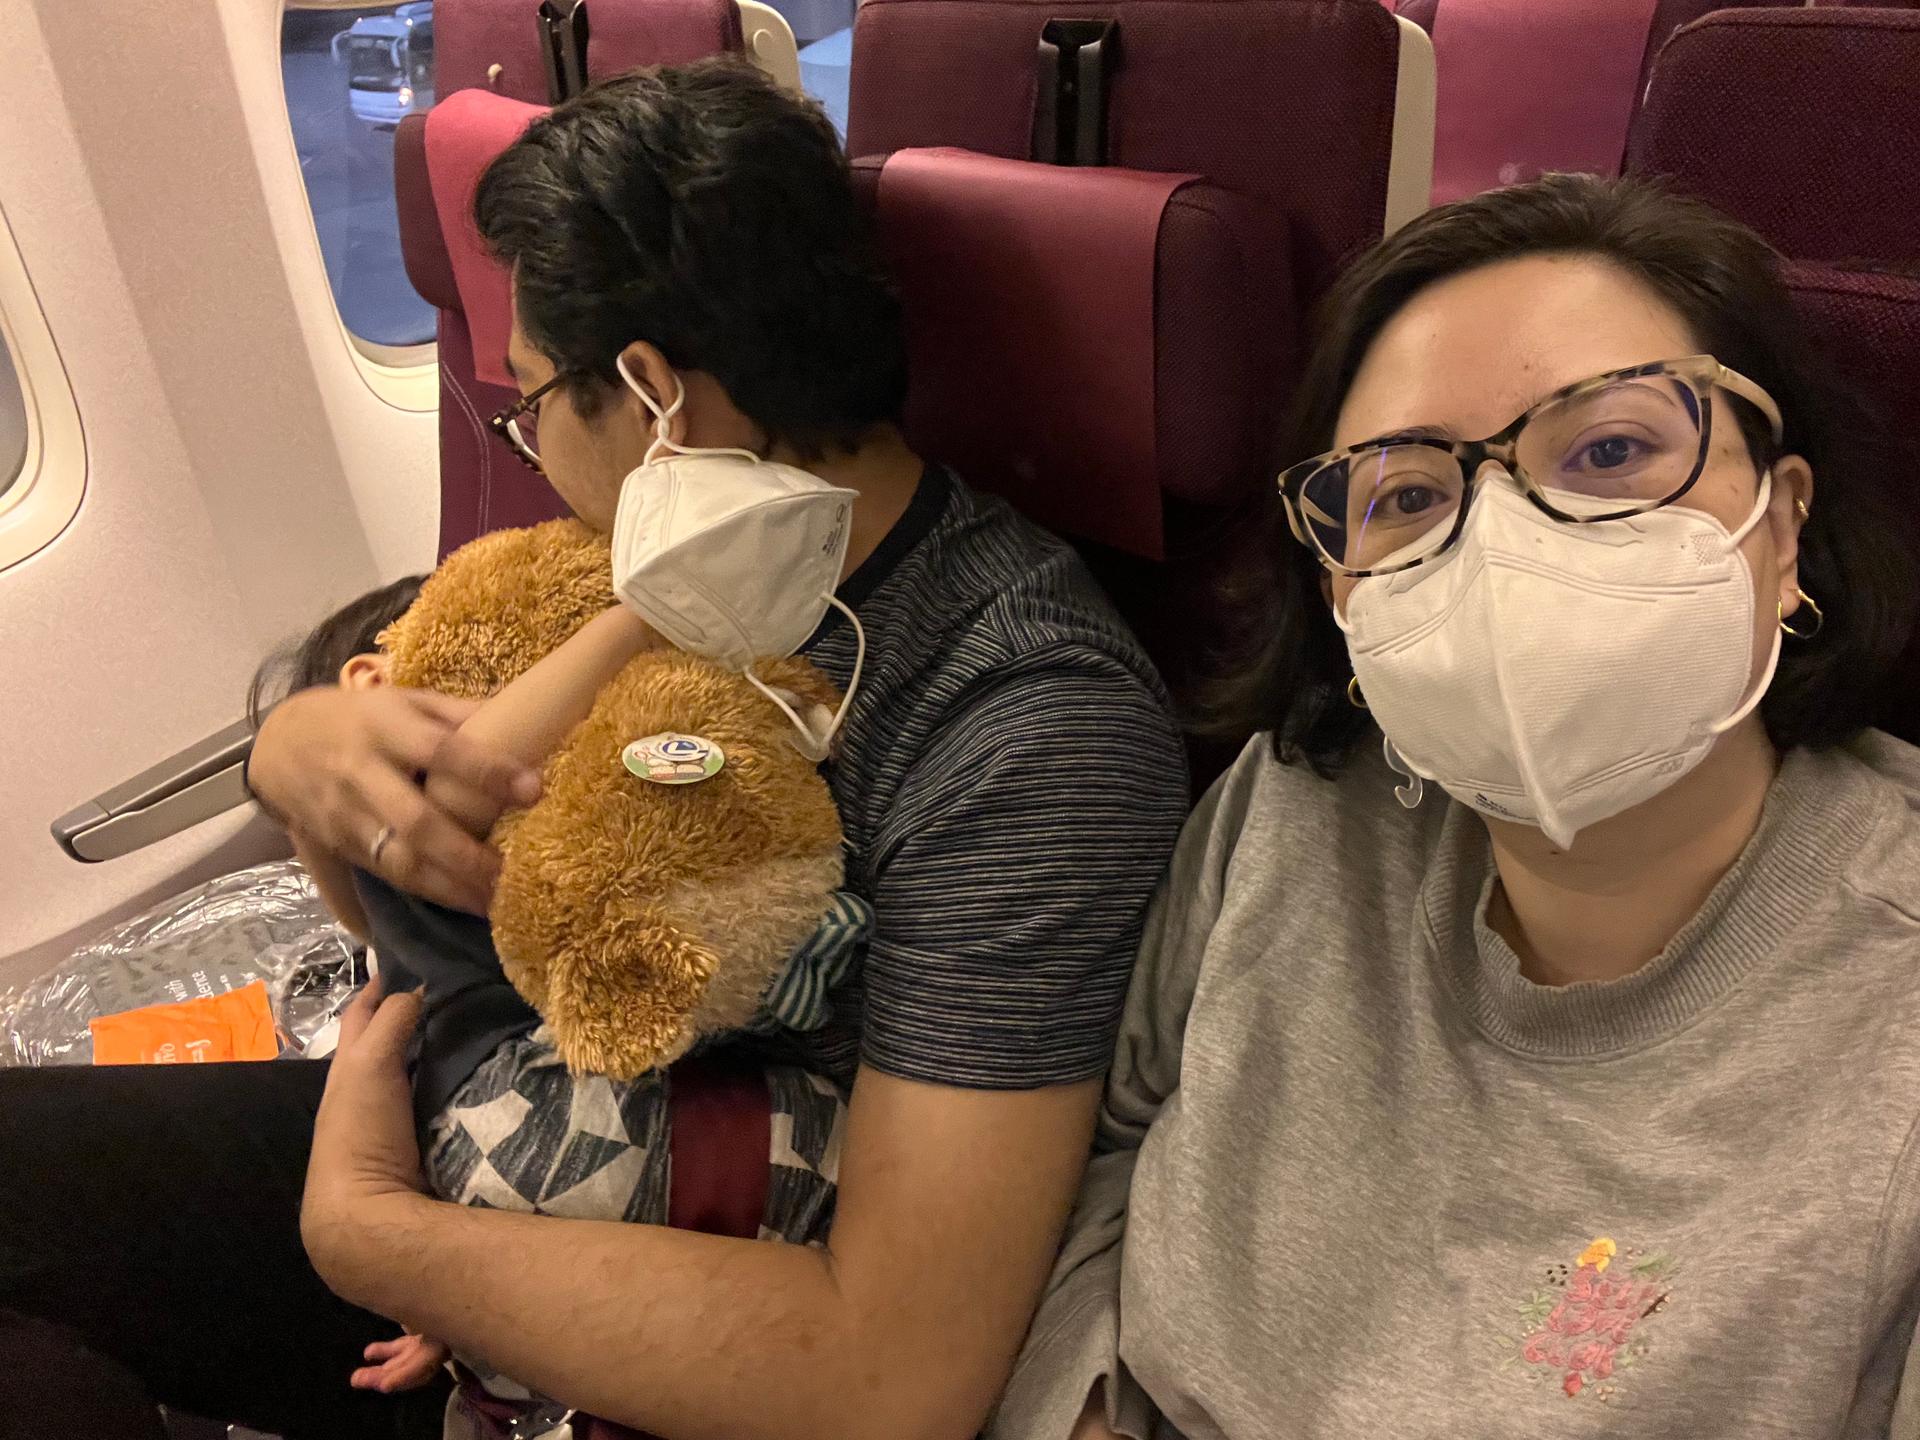 A family with sleeping toddler on an airplane